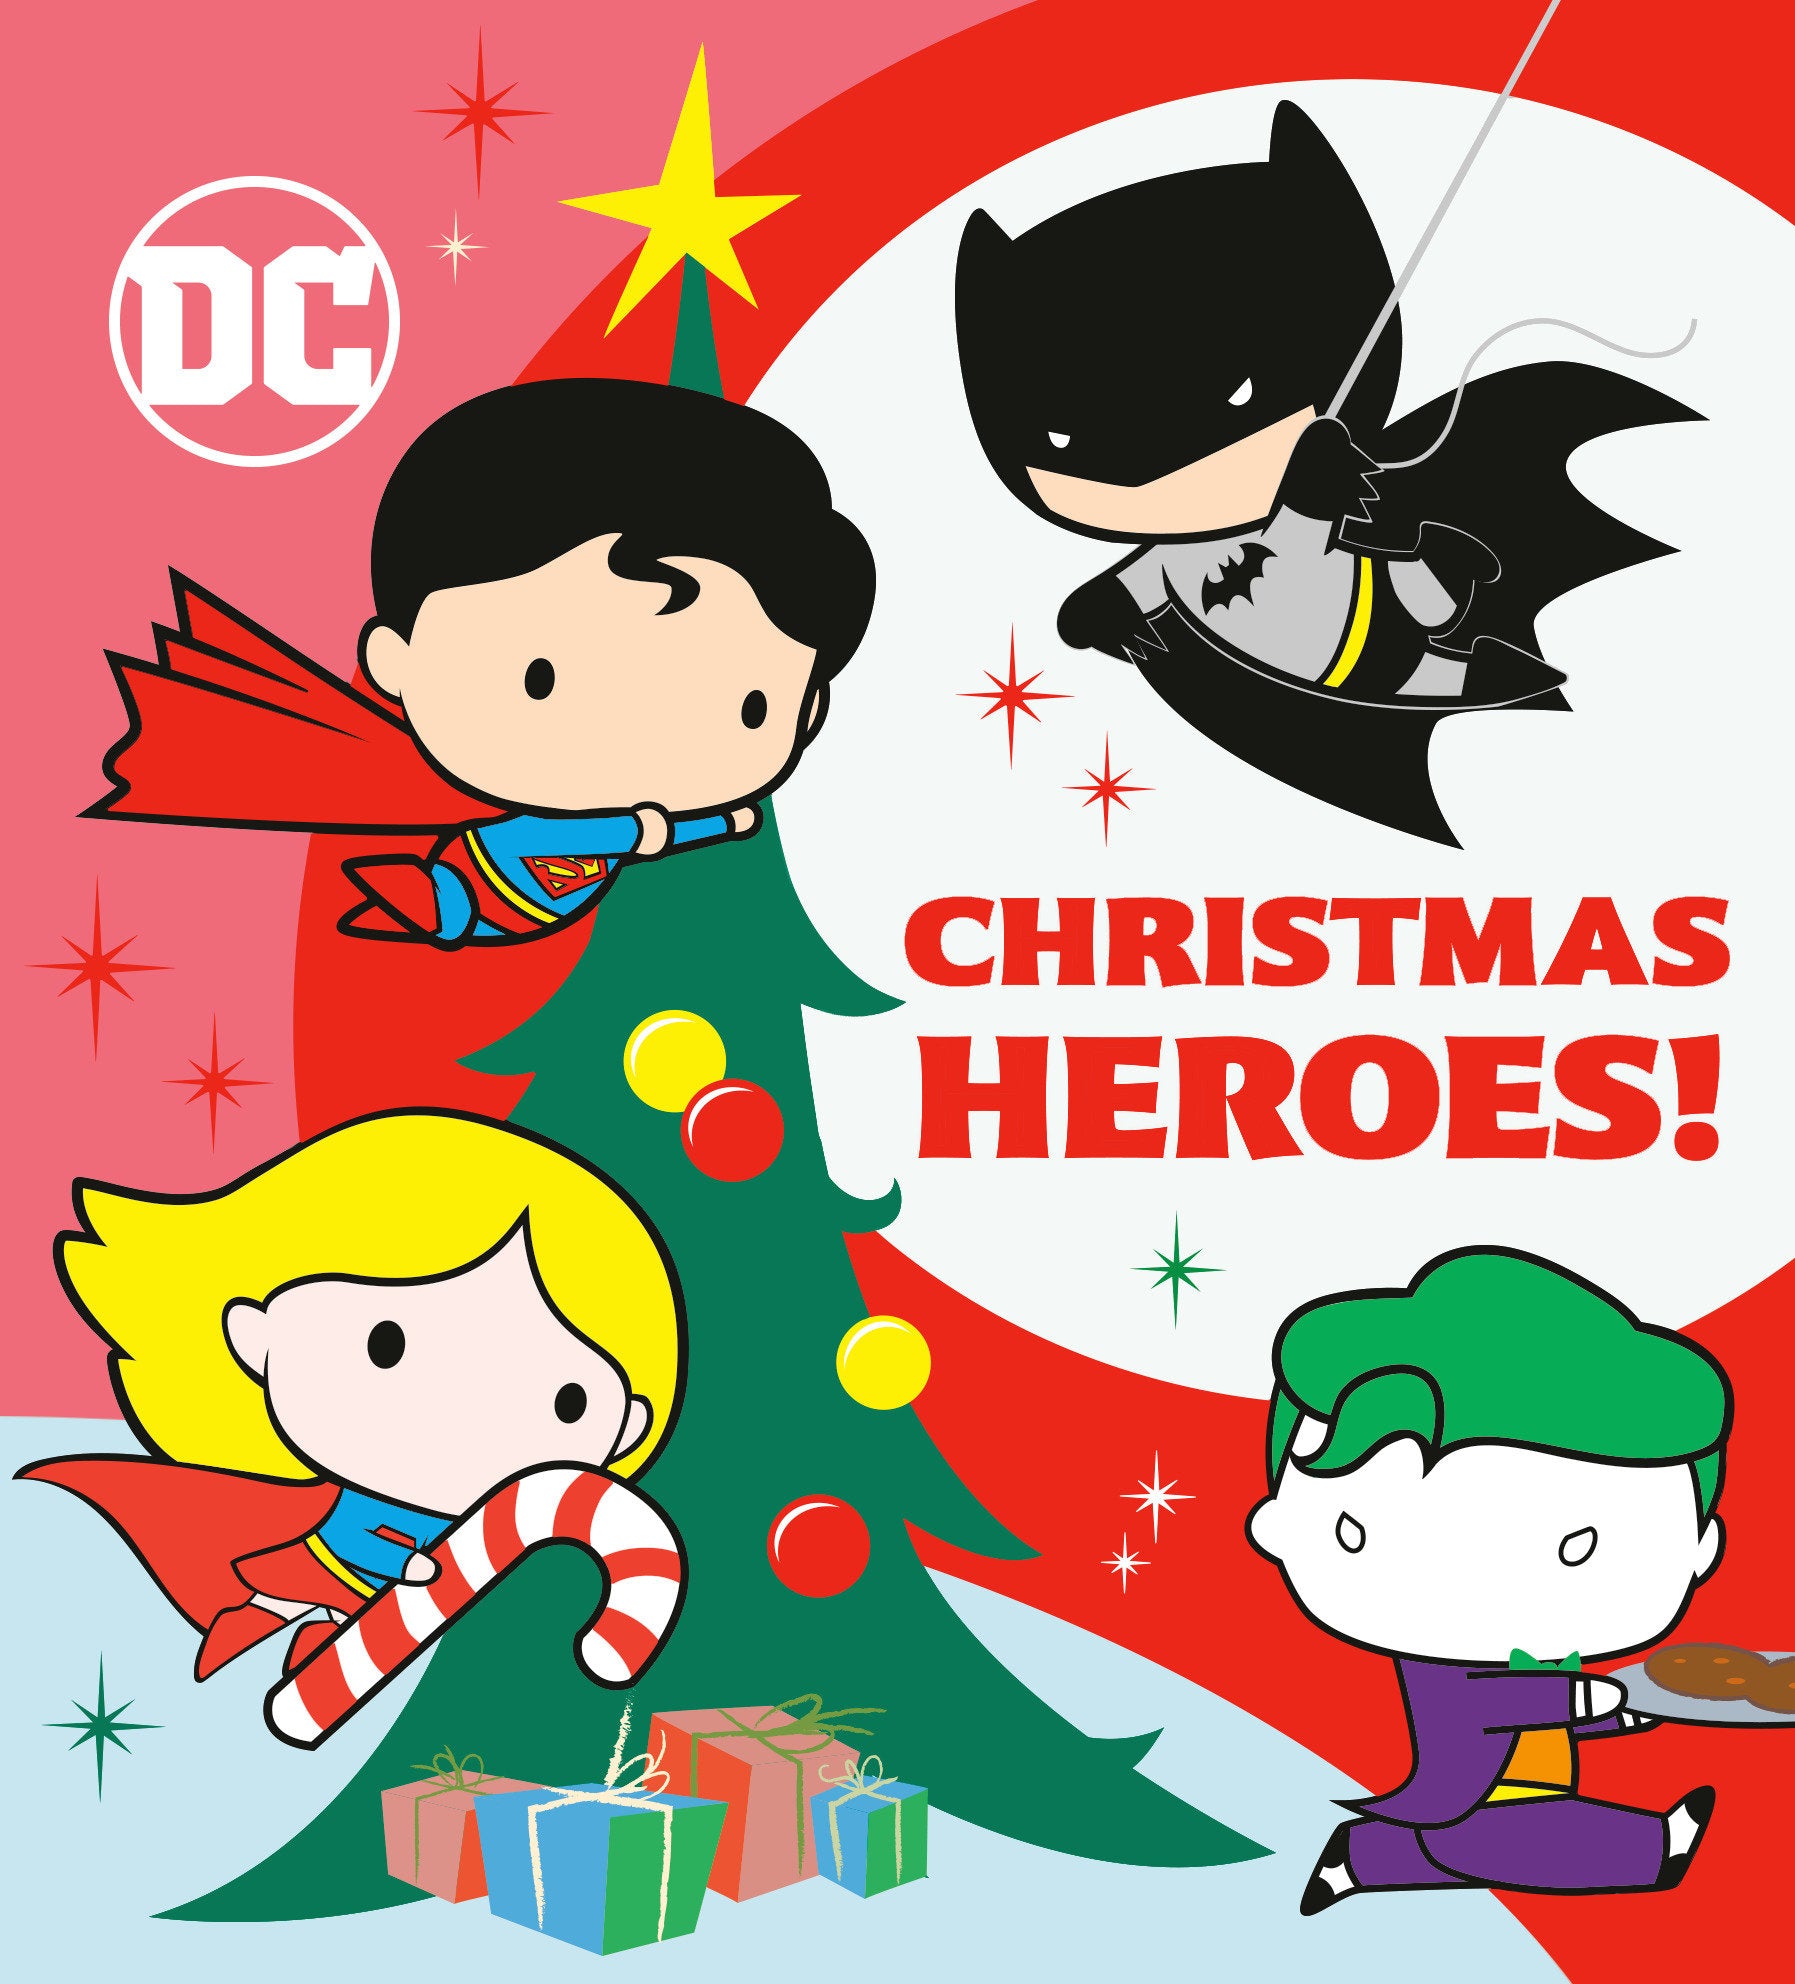 Christmas Heroes! (DC Justice League)